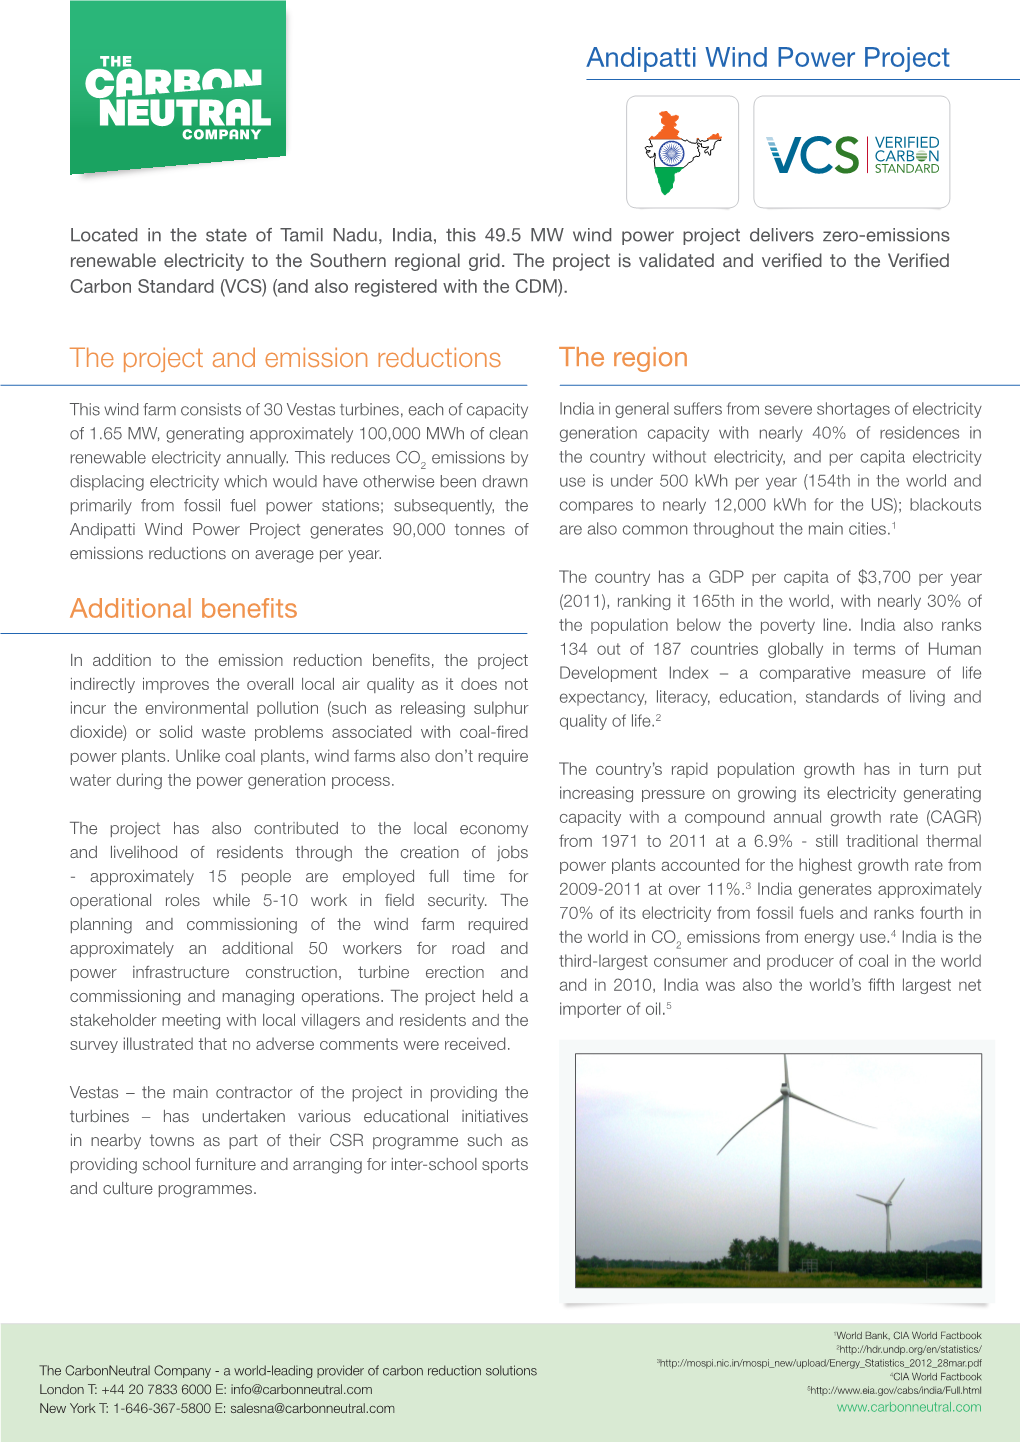 Andipatti Wind Power Project the Project and Emission Reductions Additional Benefits the Region